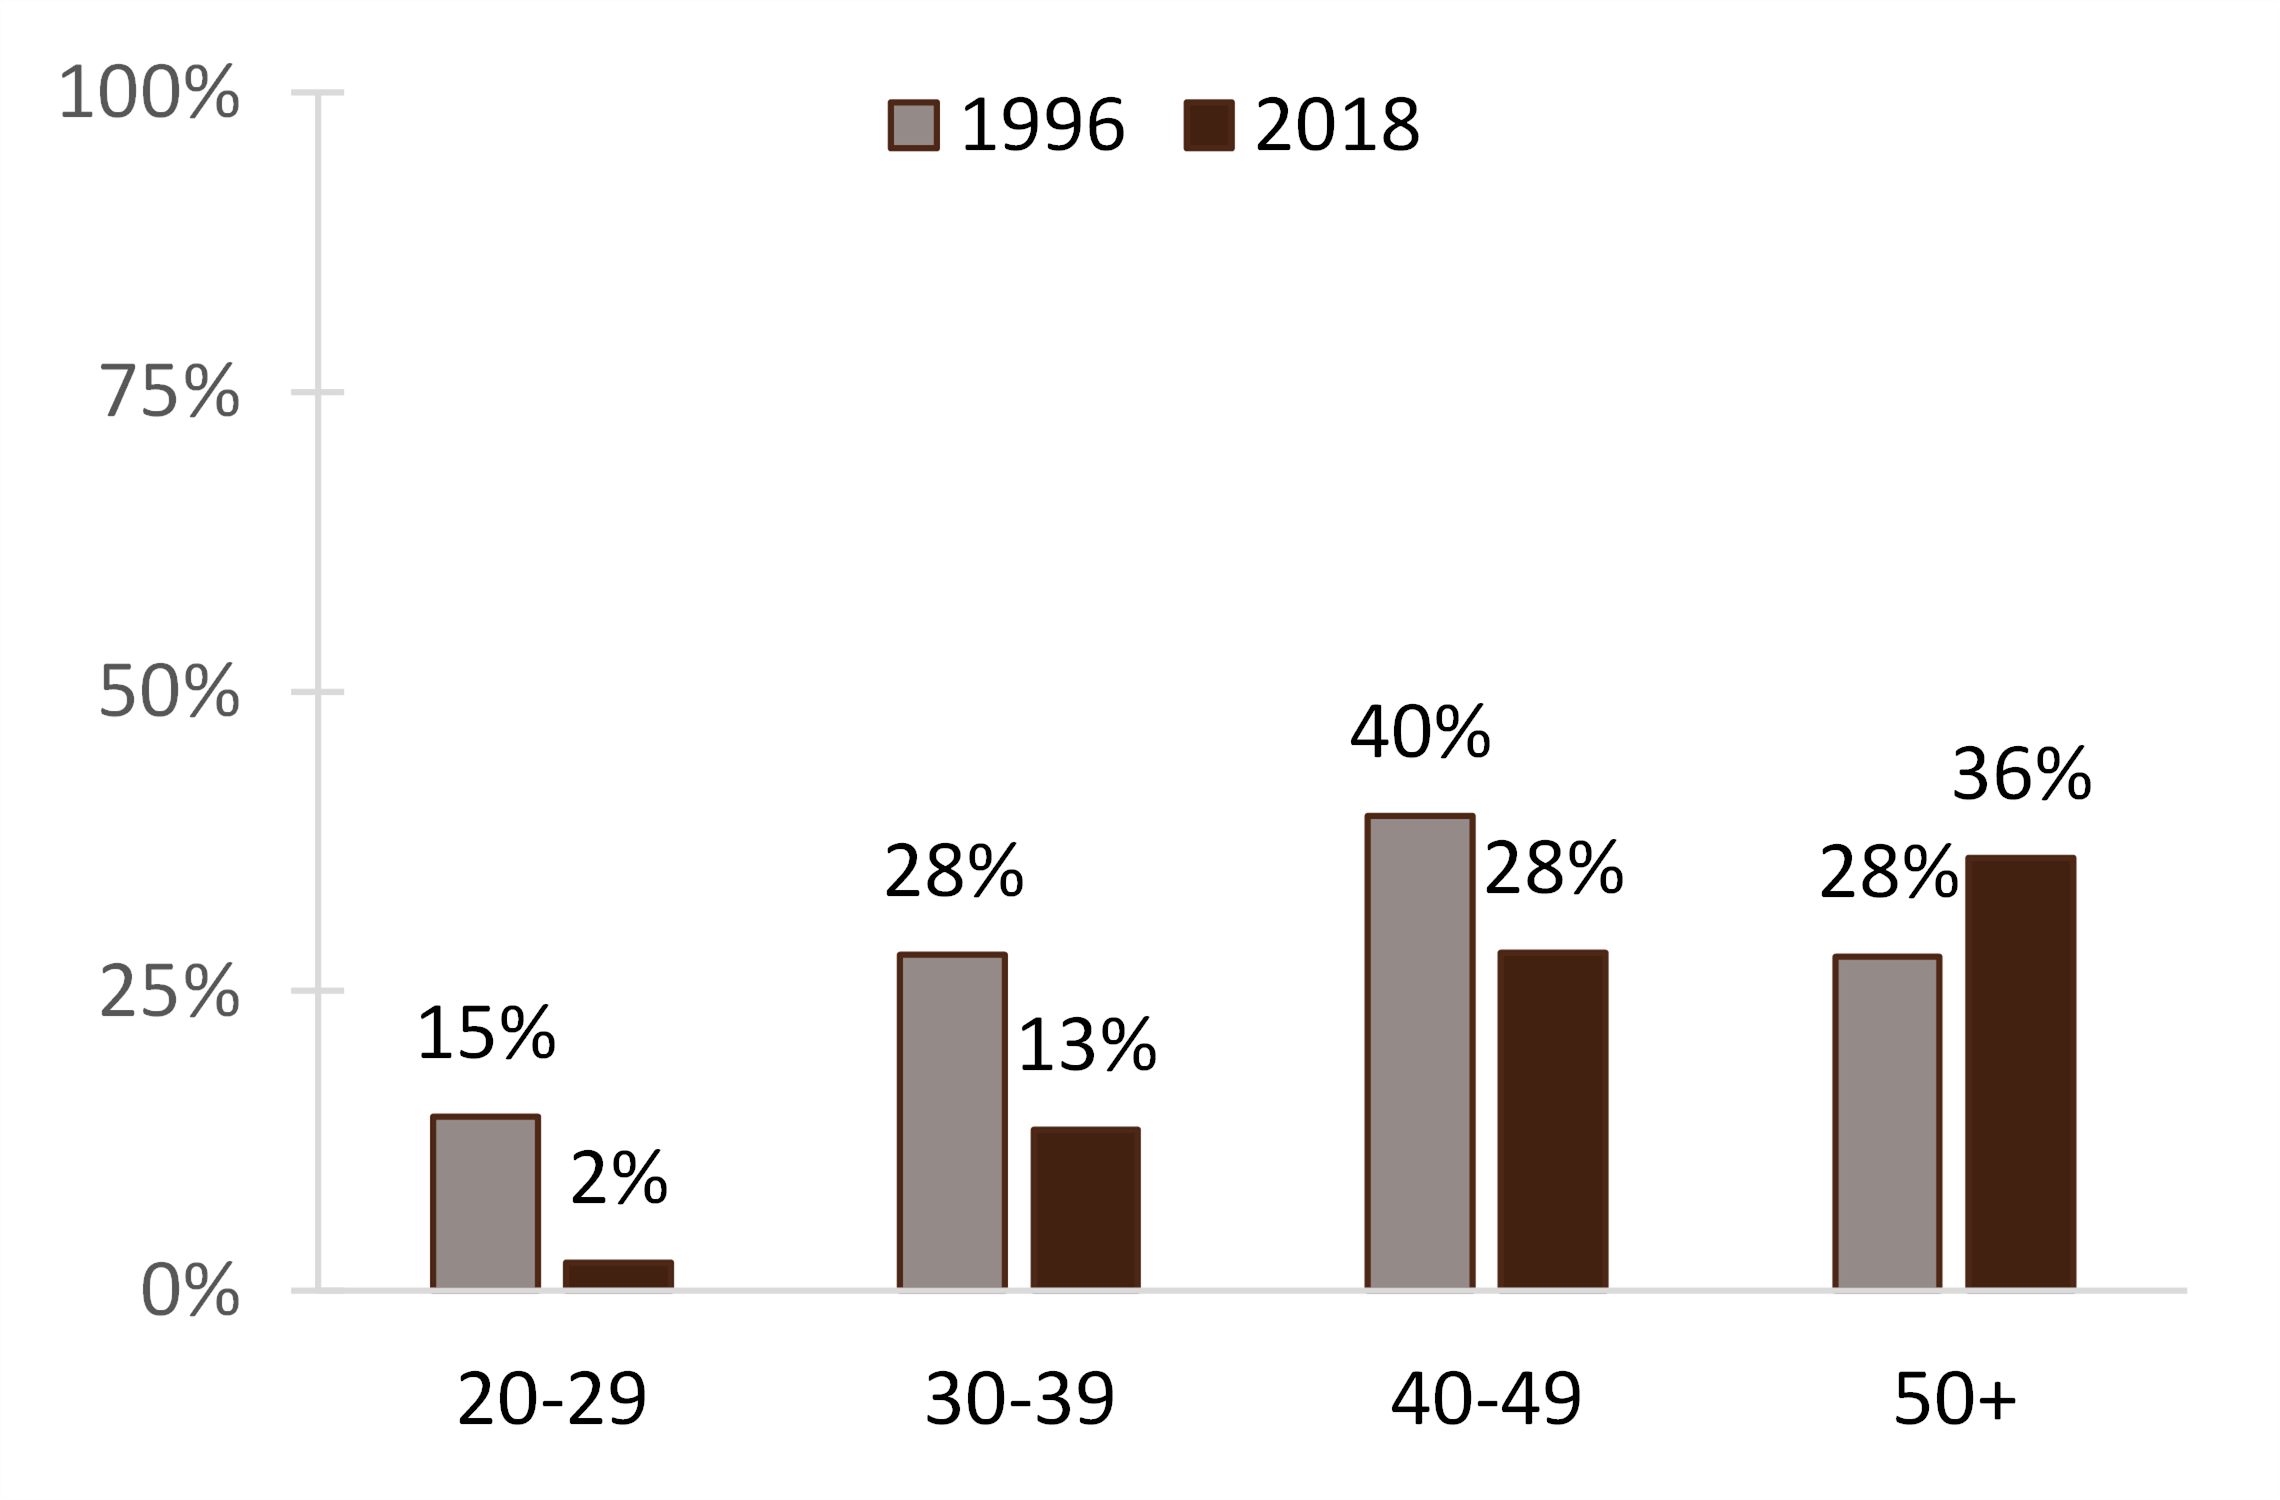 graph-showing-percentage-ever-divorced-among-ever-married-individuals-by-age-1996-&-2018